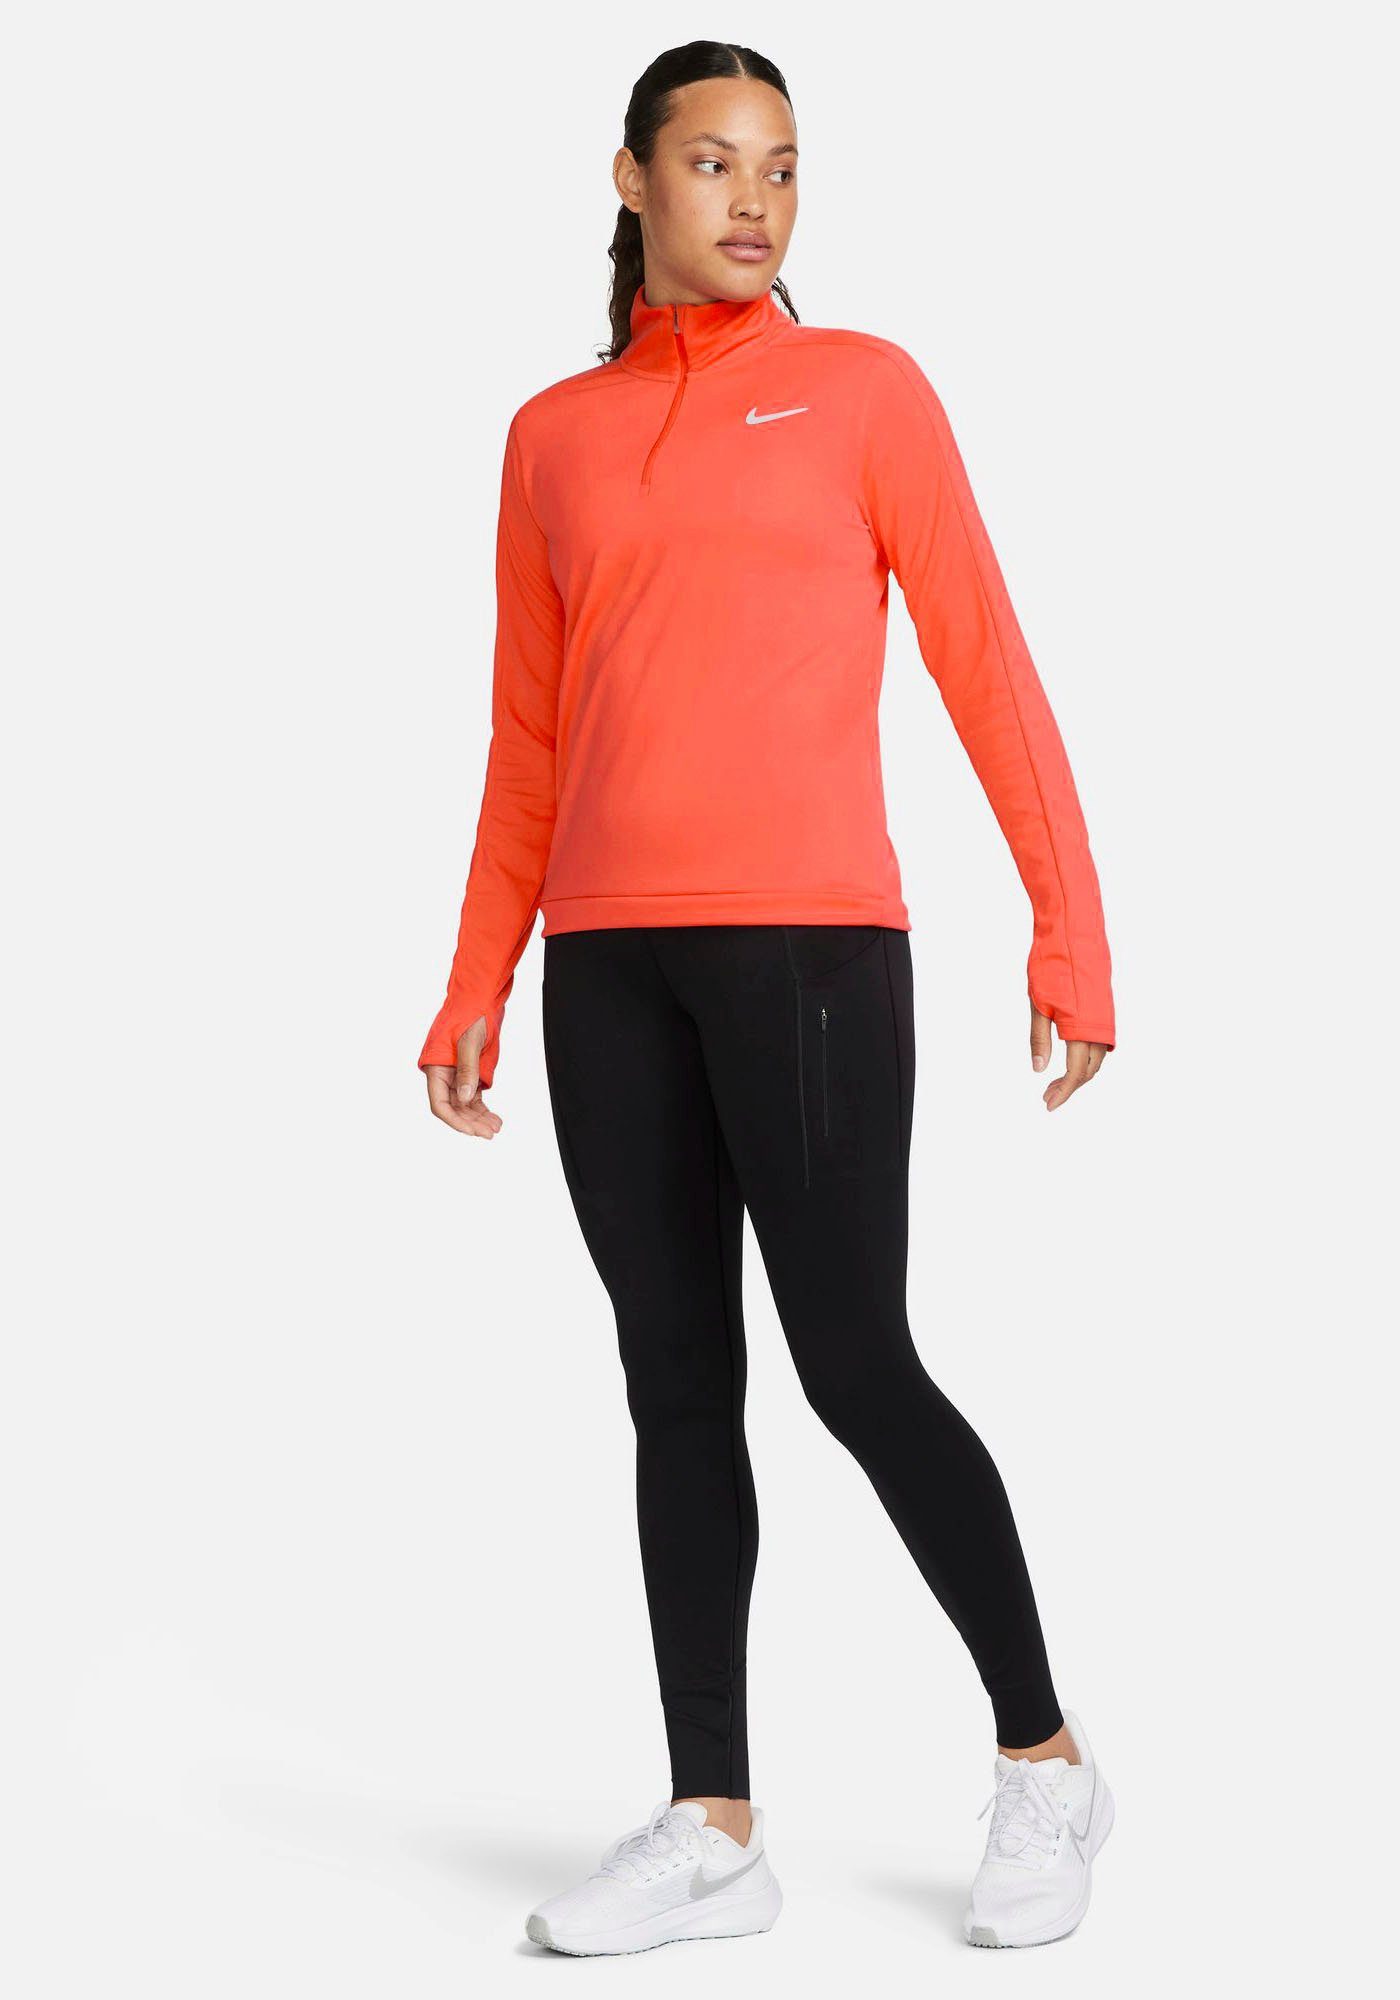 1/-ZIP Laufshirt PACER DRI-FIT Nike SILV PULLOVER GLOW/REFLECTIVE EMBER WOMEN'S